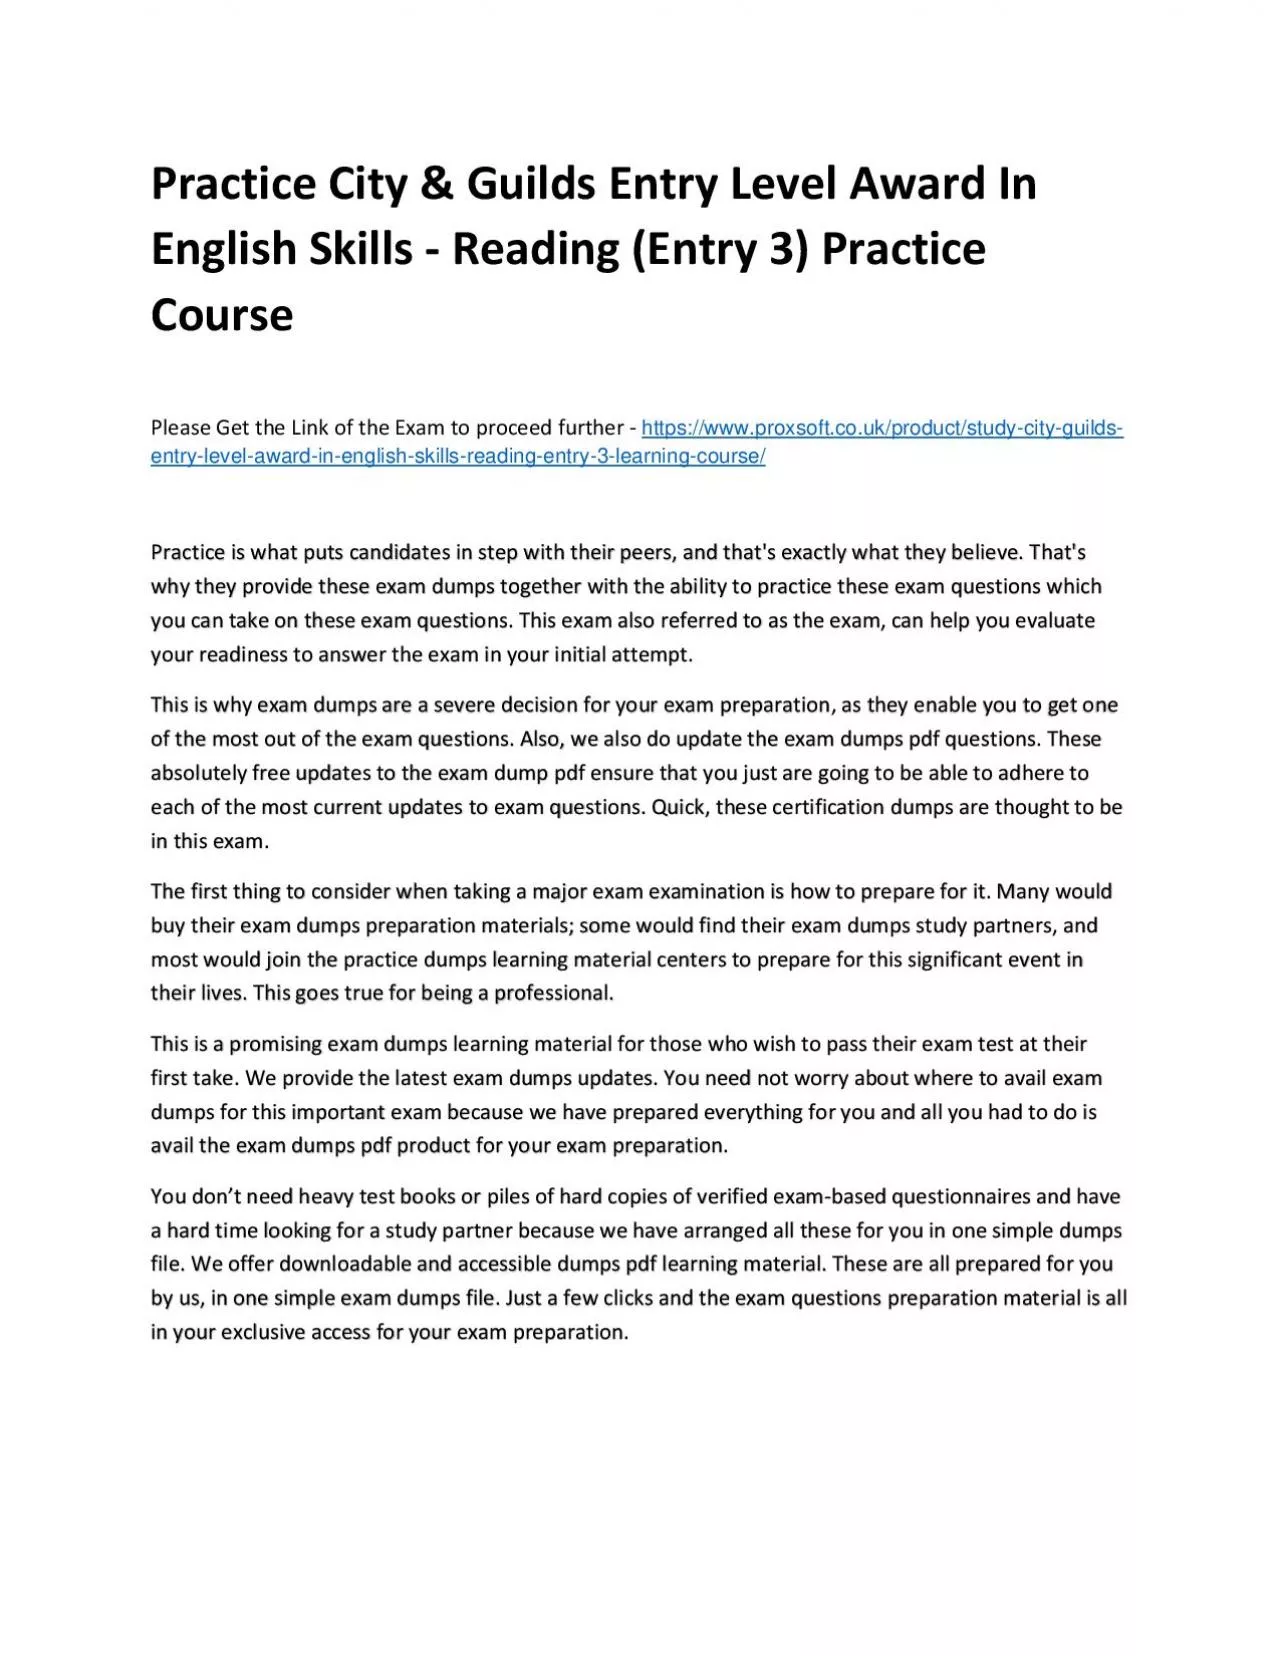 Practice City & Guilds Entry Level Award In English Skills - Reading (Entry 3) Practice